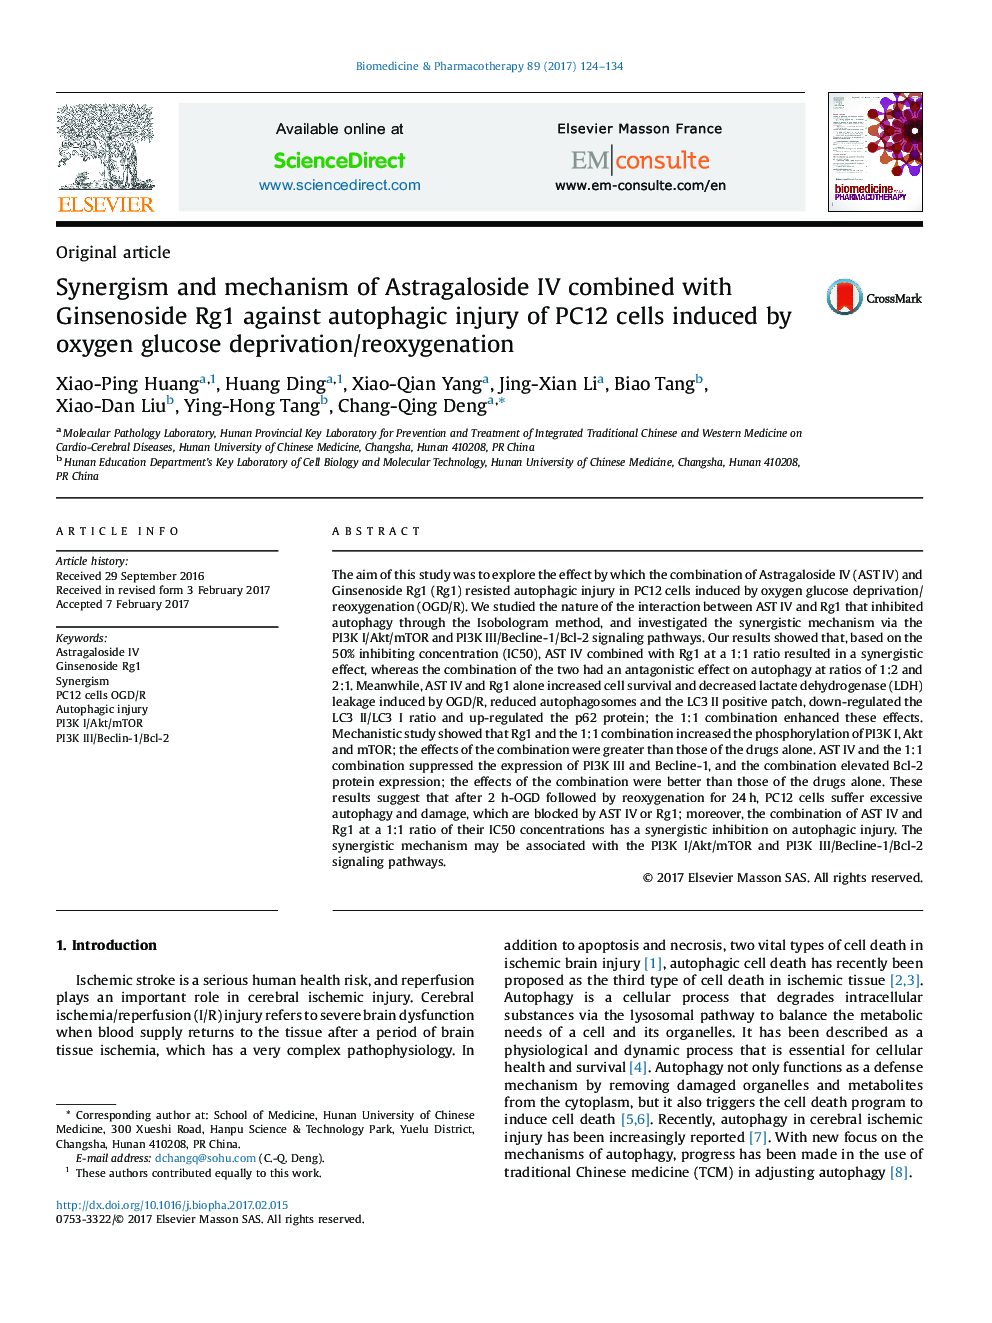 Synergism and mechanism of Astragaloside IV combined with Ginsenoside Rg1 against autophagic injury of PC12 cells induced by oxygen glucose deprivation/reoxygenation